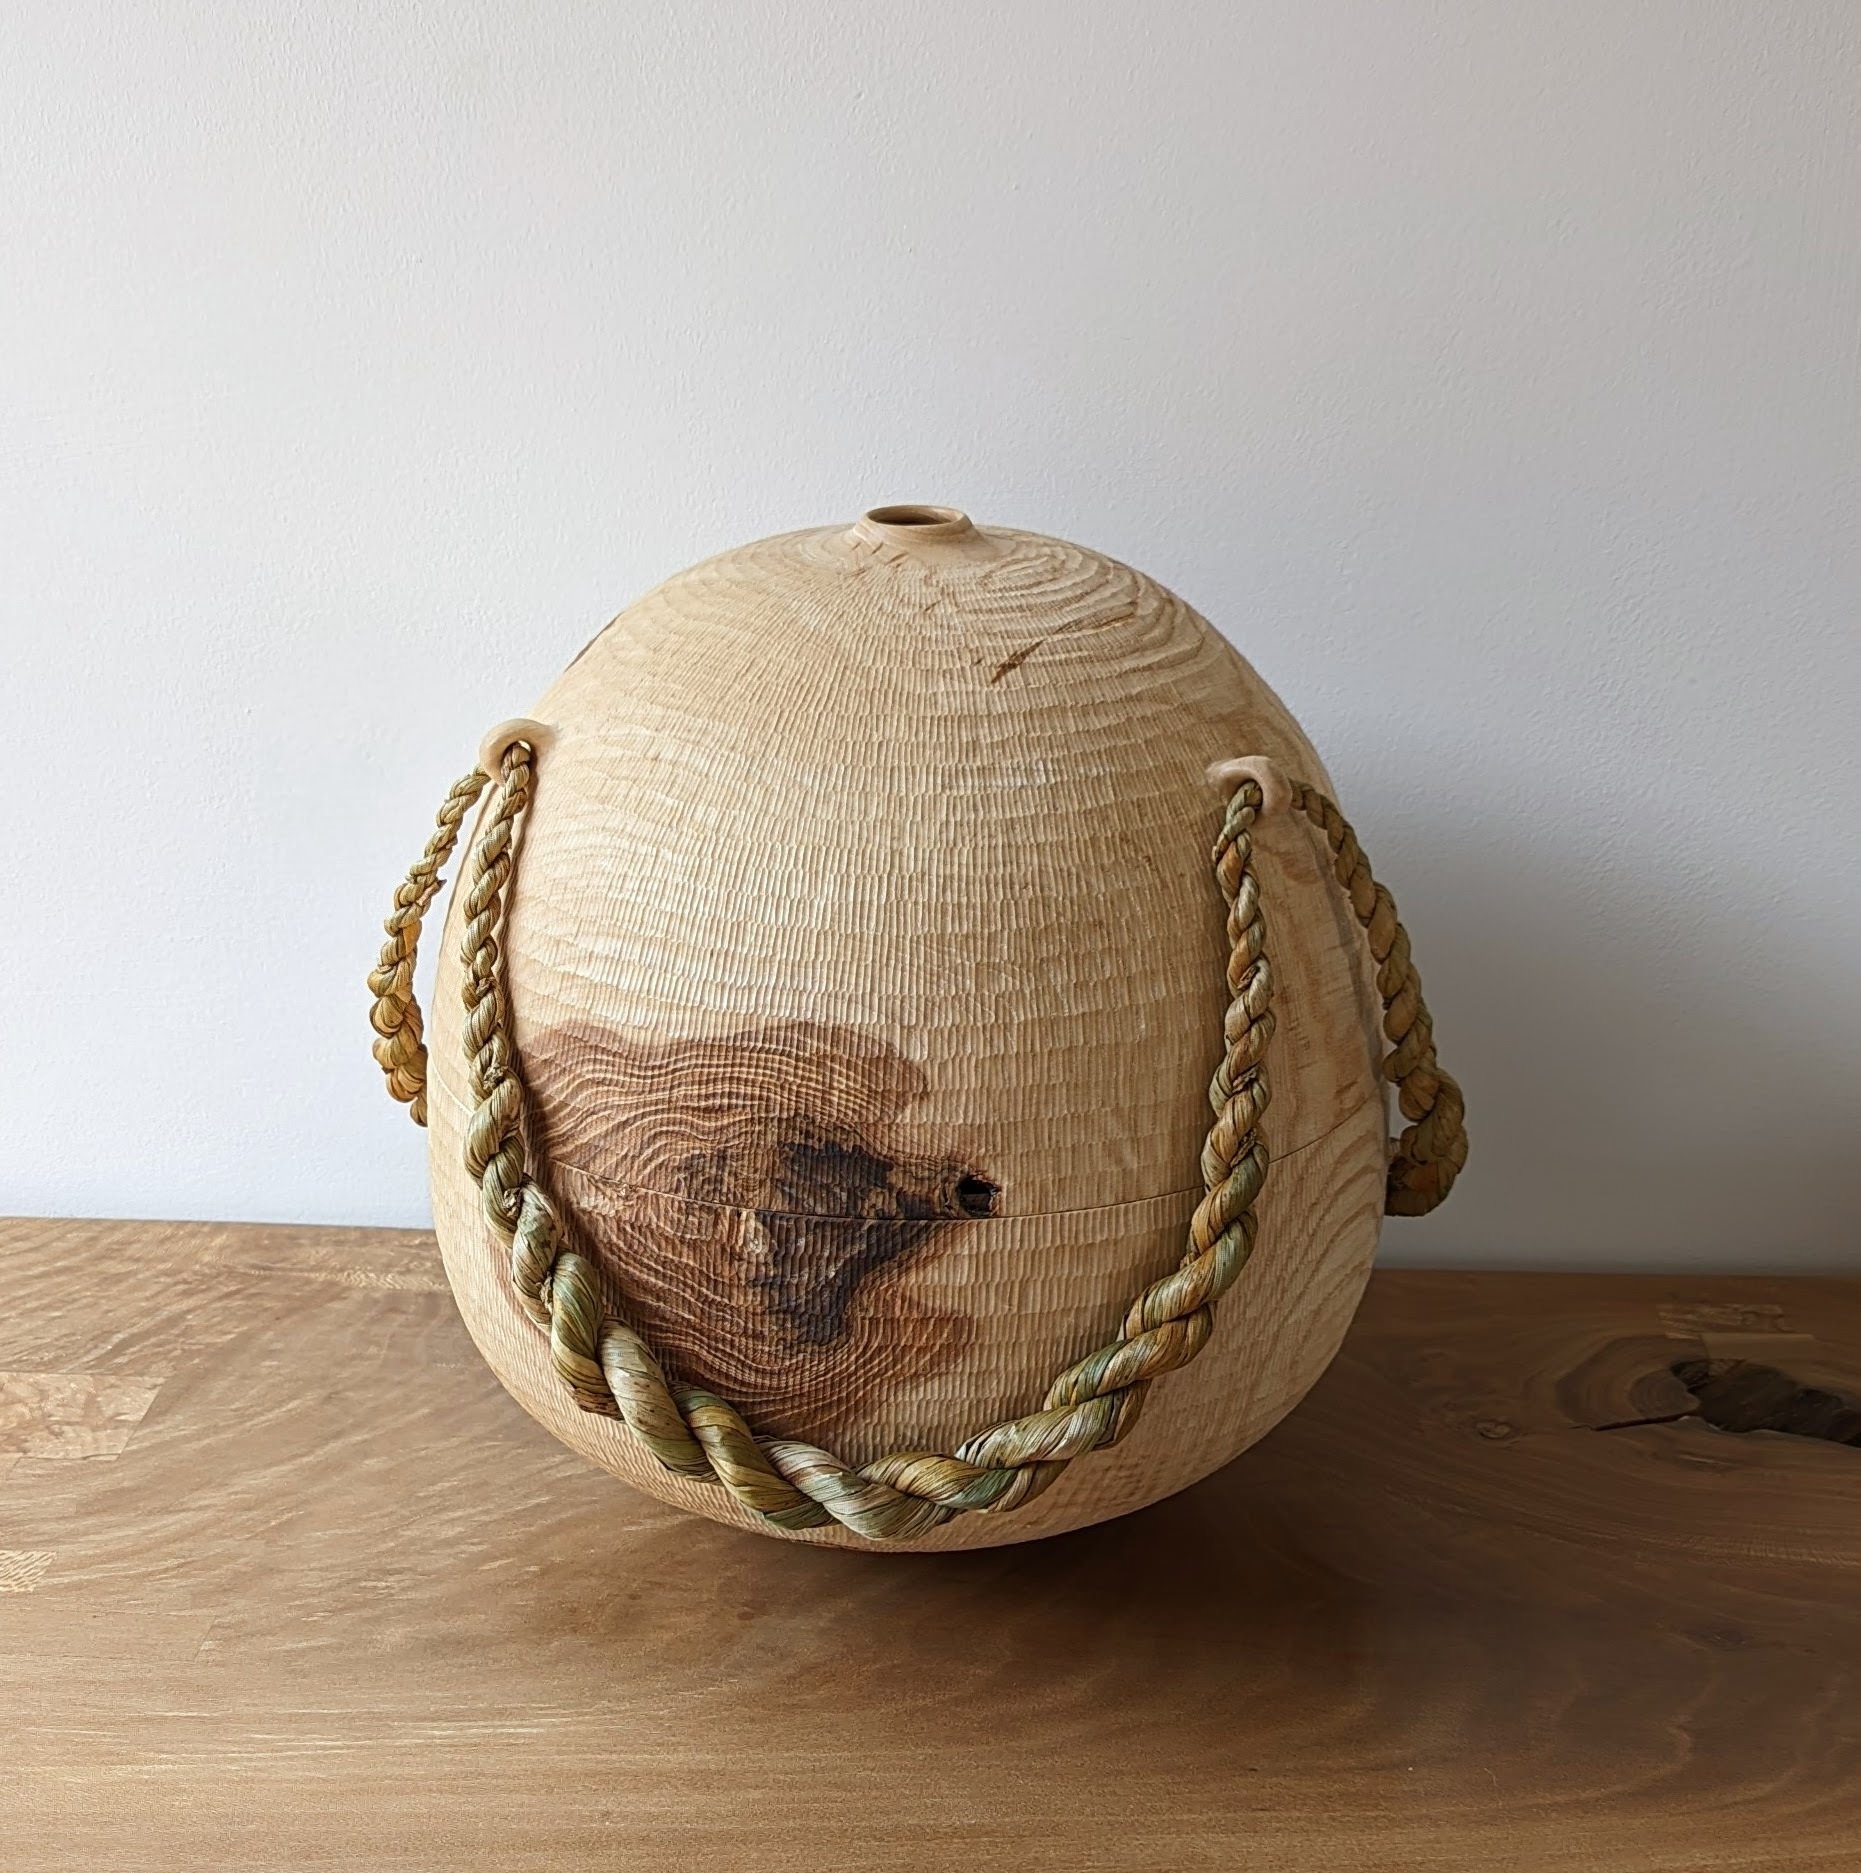 Large wooden vessel with twisted rope tied around it